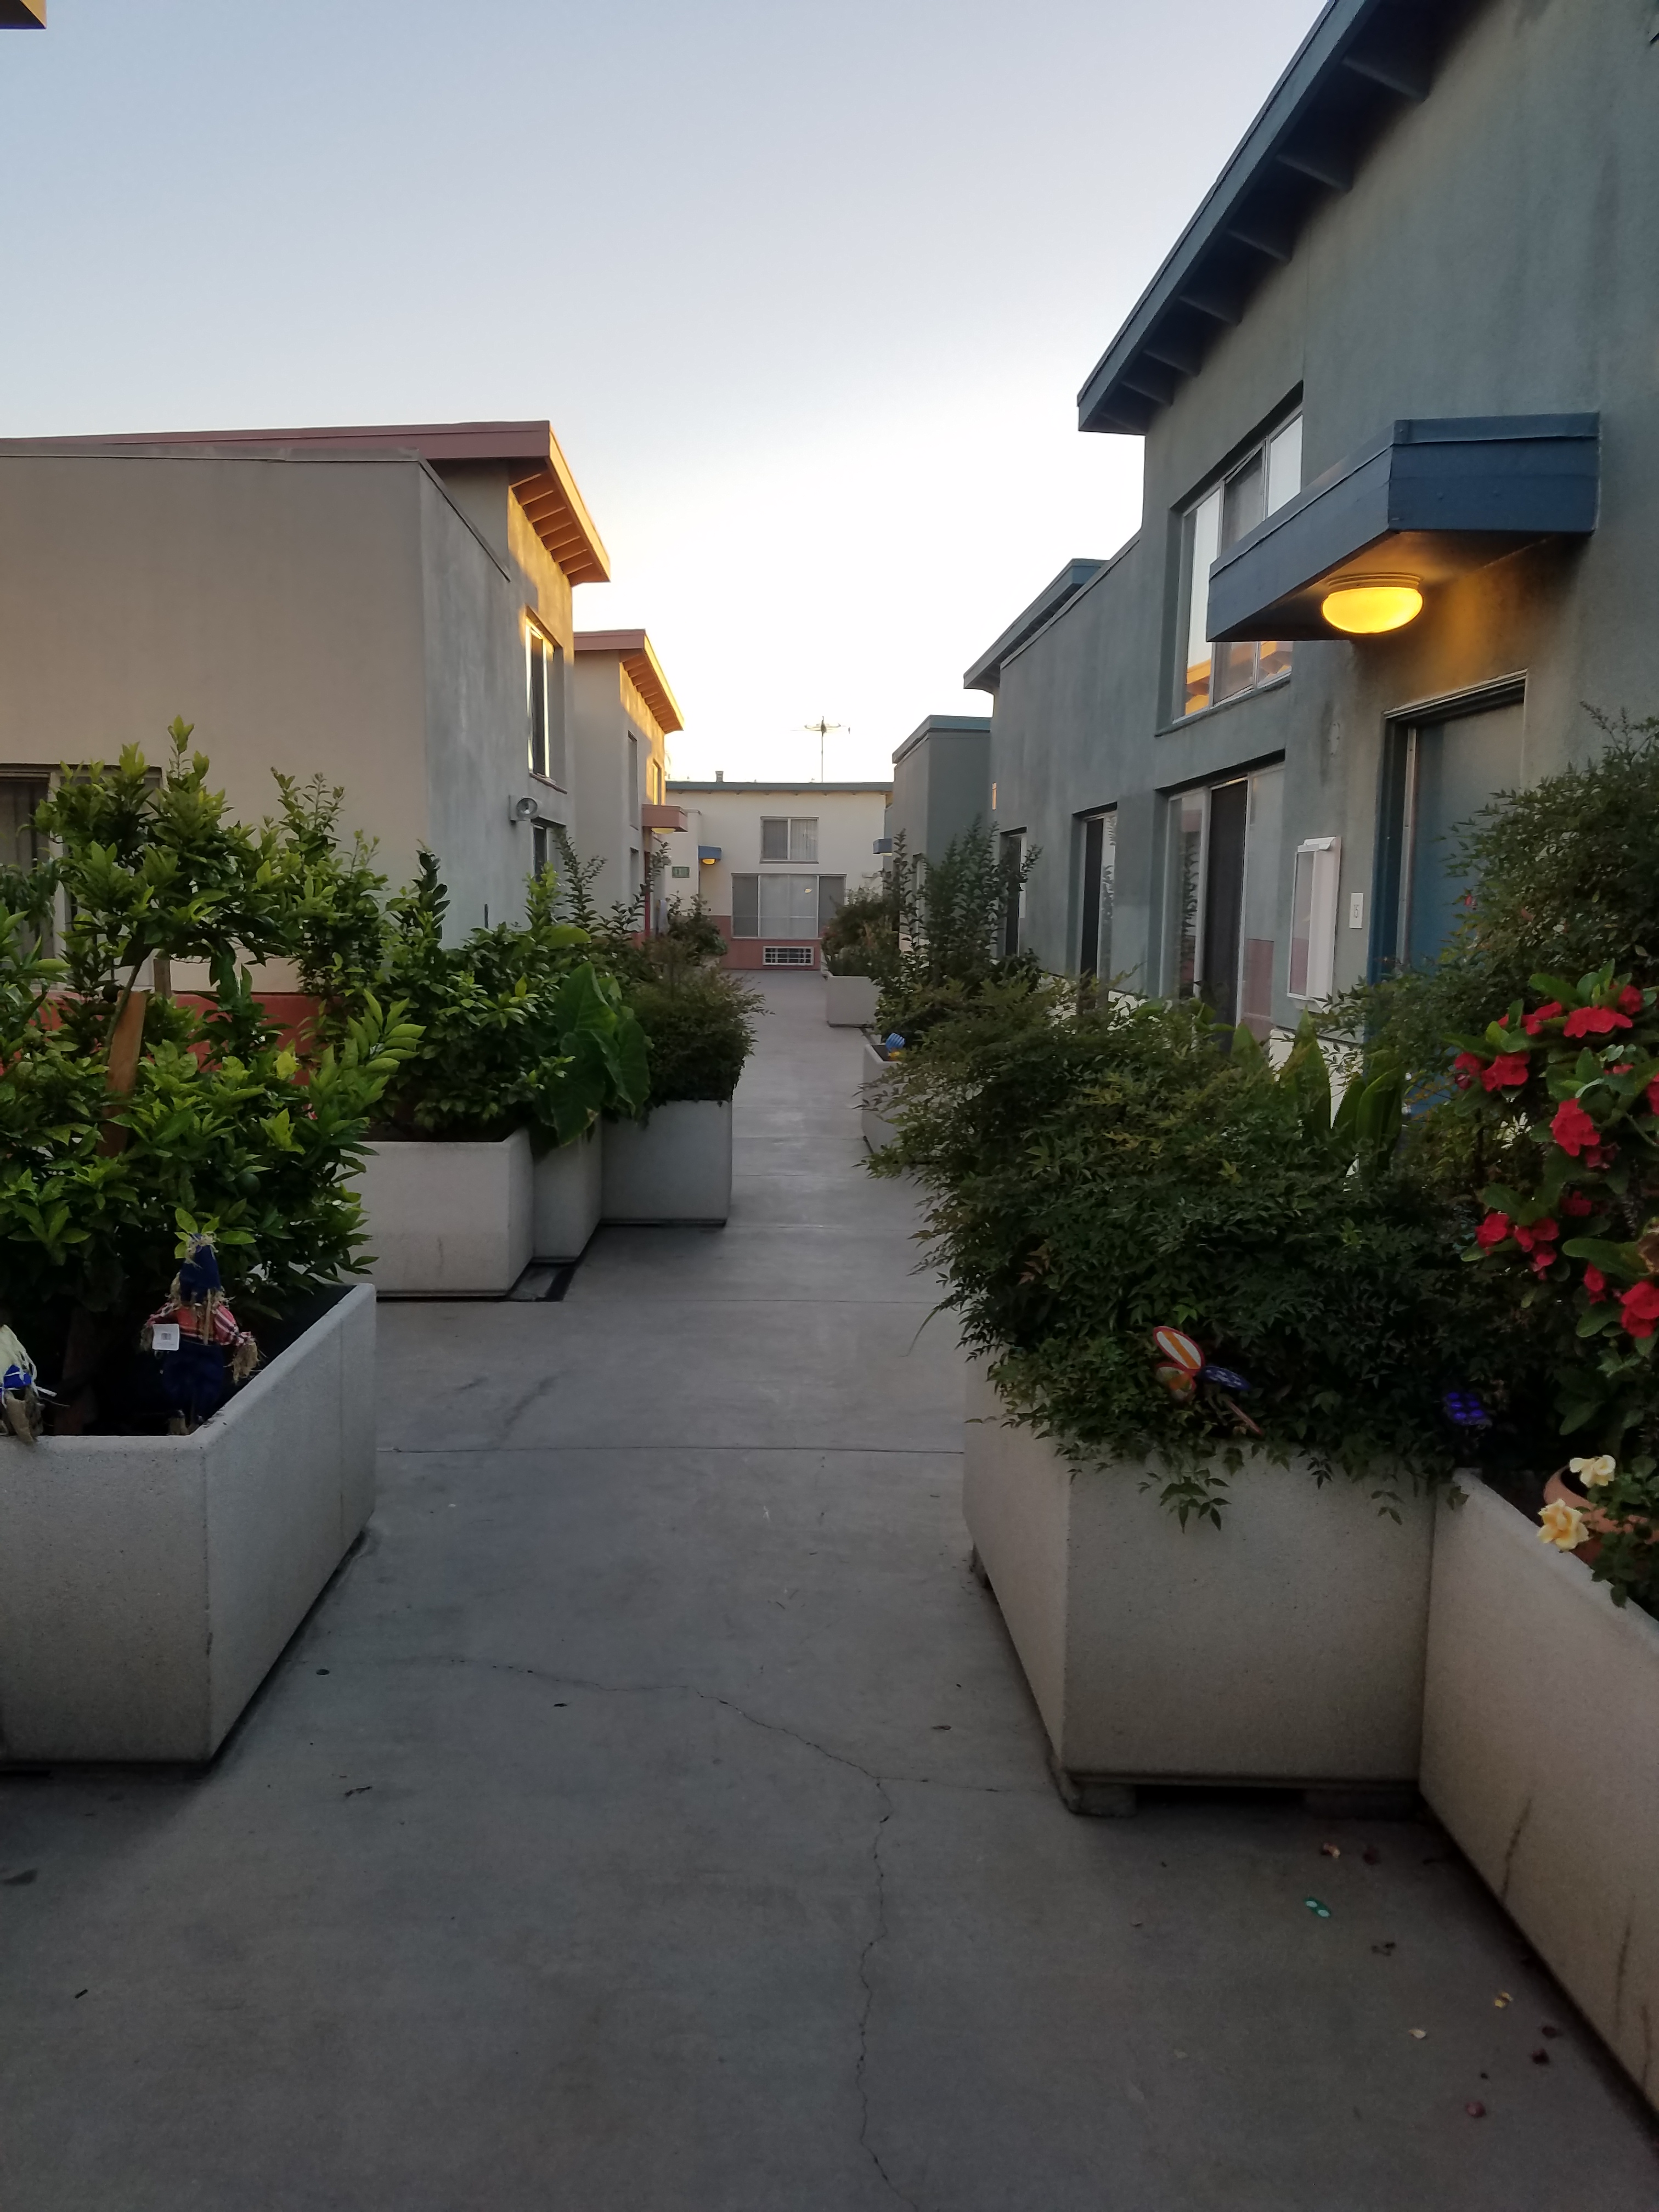 Parthenia court upstairs courtyard. Large raised bed planters along buildings and walkway